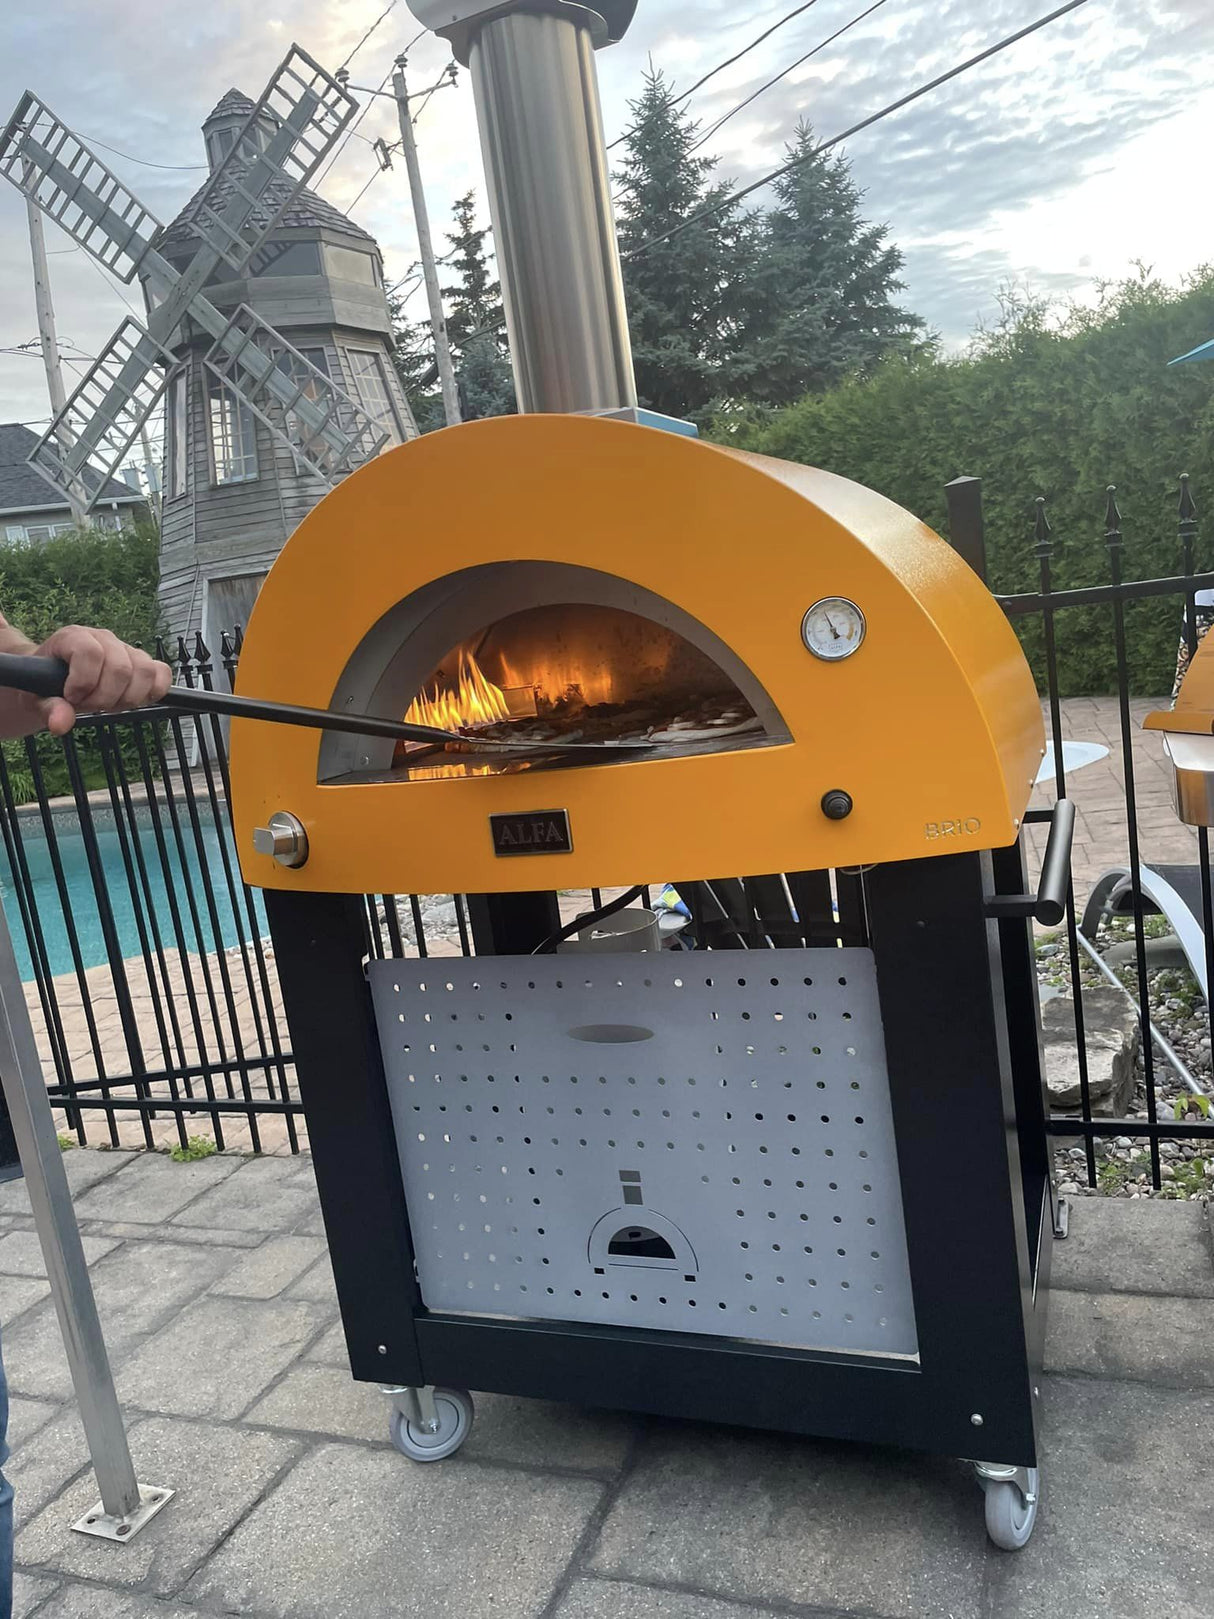 Alfa Brio 27-Inch Outdoor Freestanding Gas Pizza Oven with Base - Fire Yellow